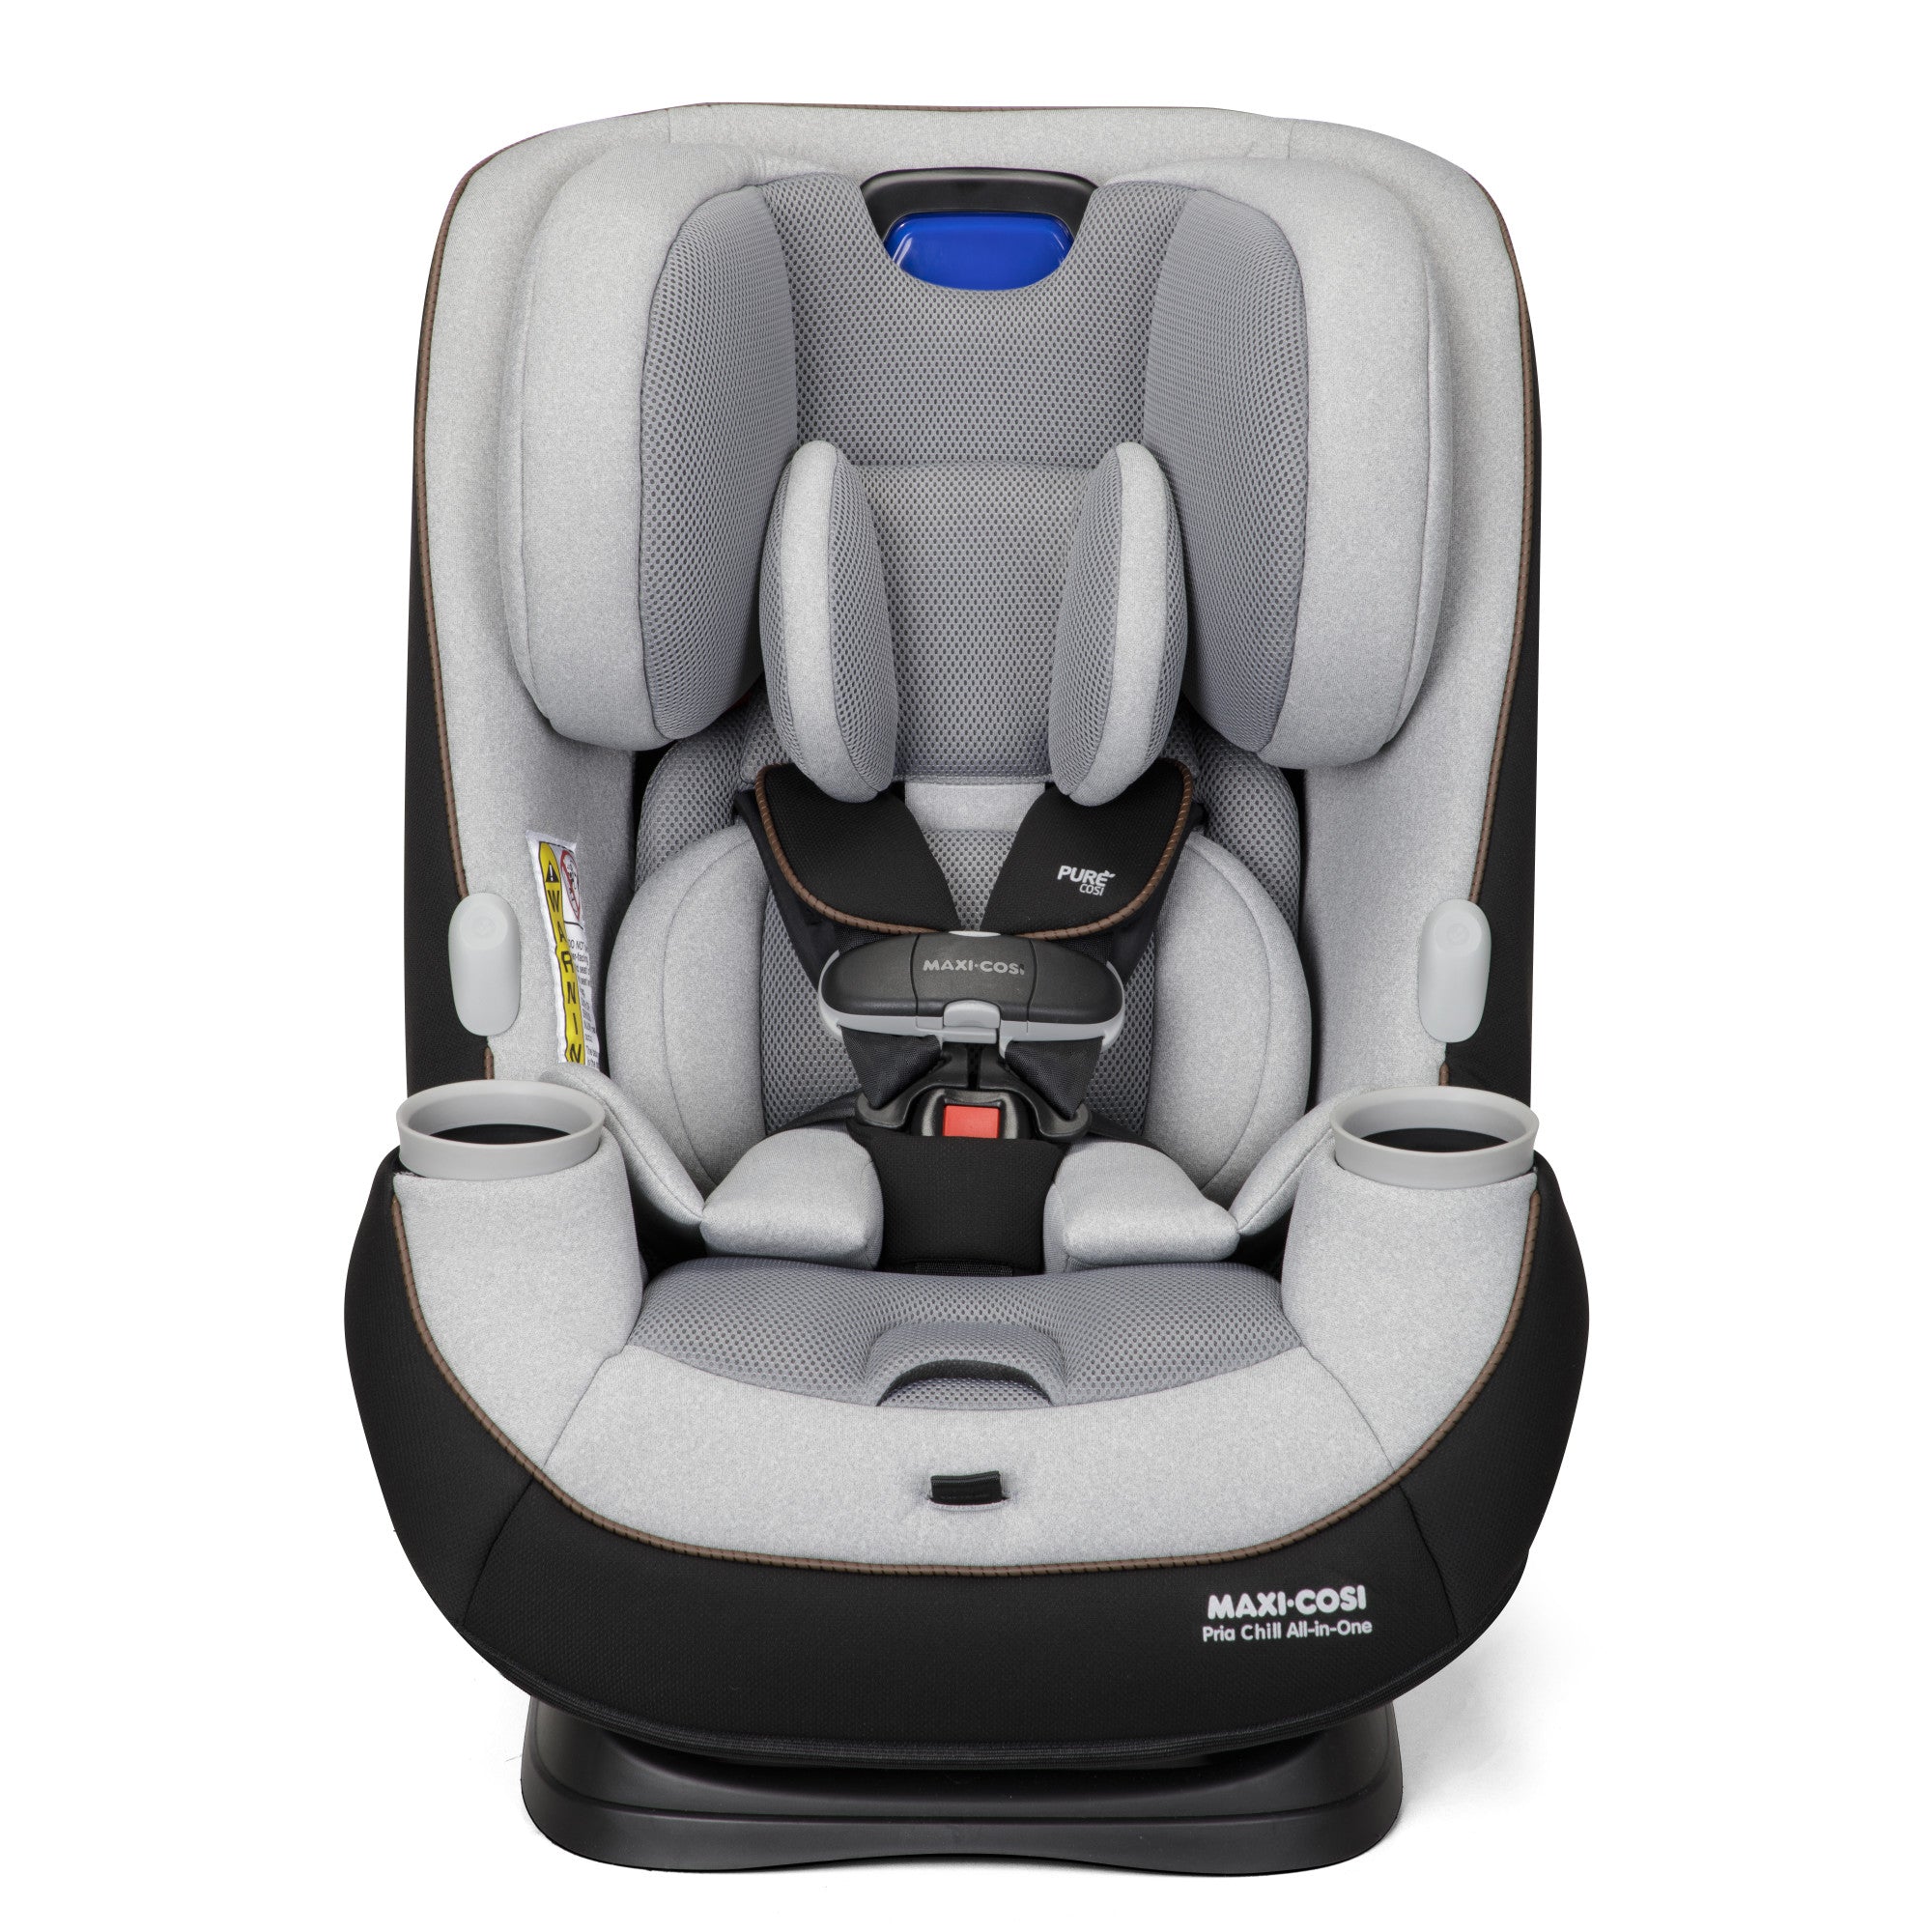 Maxi-Cosi Pria Chill All-in-One Convertible Car Seat - Twinkle Twinkle Little One